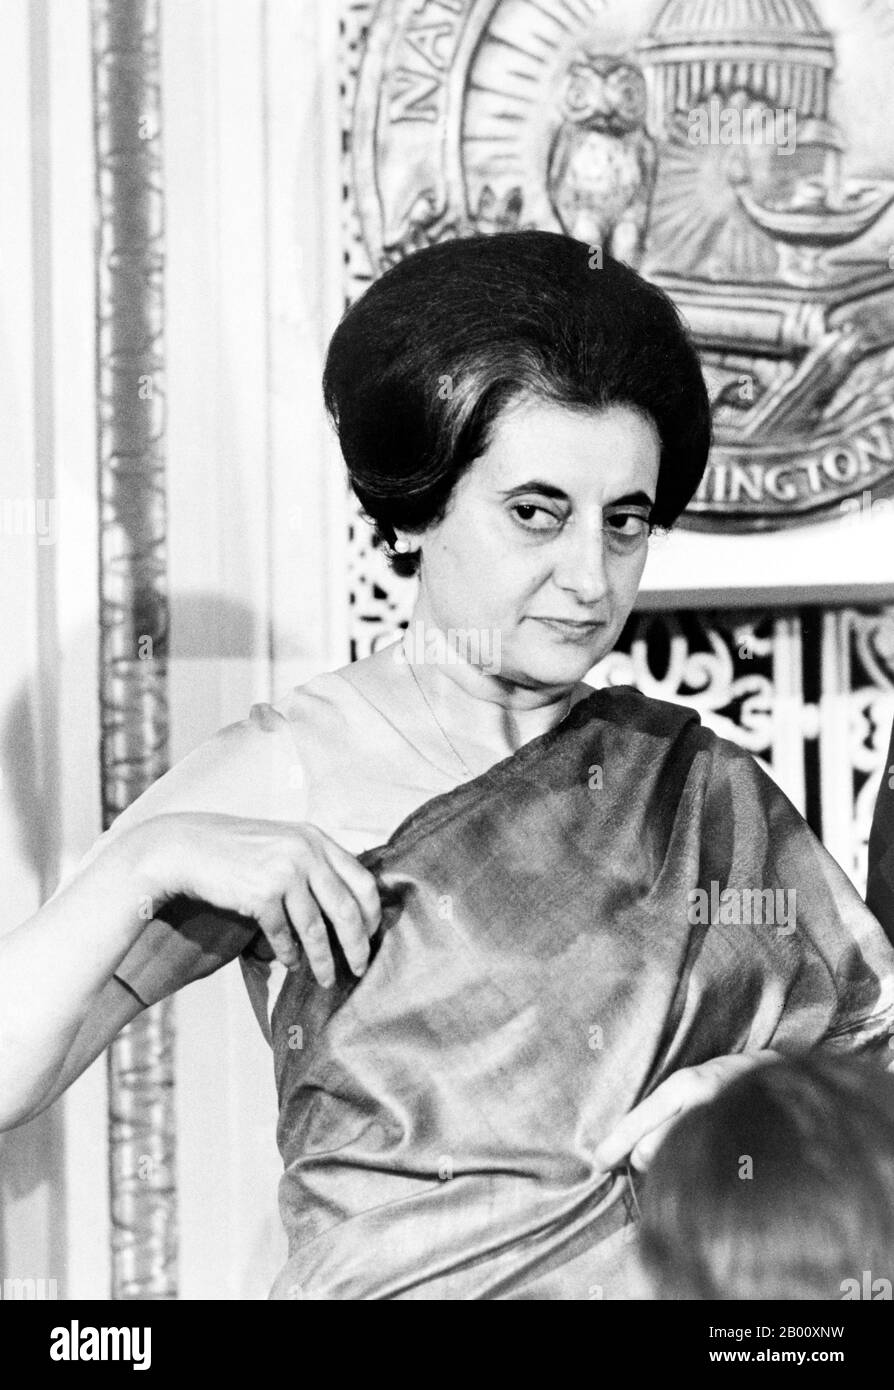 India: Indira Gandhi (1917-1984), Prime Minister of India for four consecutive terms, 1966-1984. Photo by Warren K. Leffler, 29 March 1966.  Indira Priyadarshini Gandhi (19 November 1917 – 31 October 1984) was the Prime Minister of the Republic of India for three consecutive terms from 1966 to 1977 and for a fourth term from 1980 until her assassination in 1984, a total of fifteen years. She is India's only female prime minister to date. She is the world's all time longest serving female Prime Minister. Stock Photo